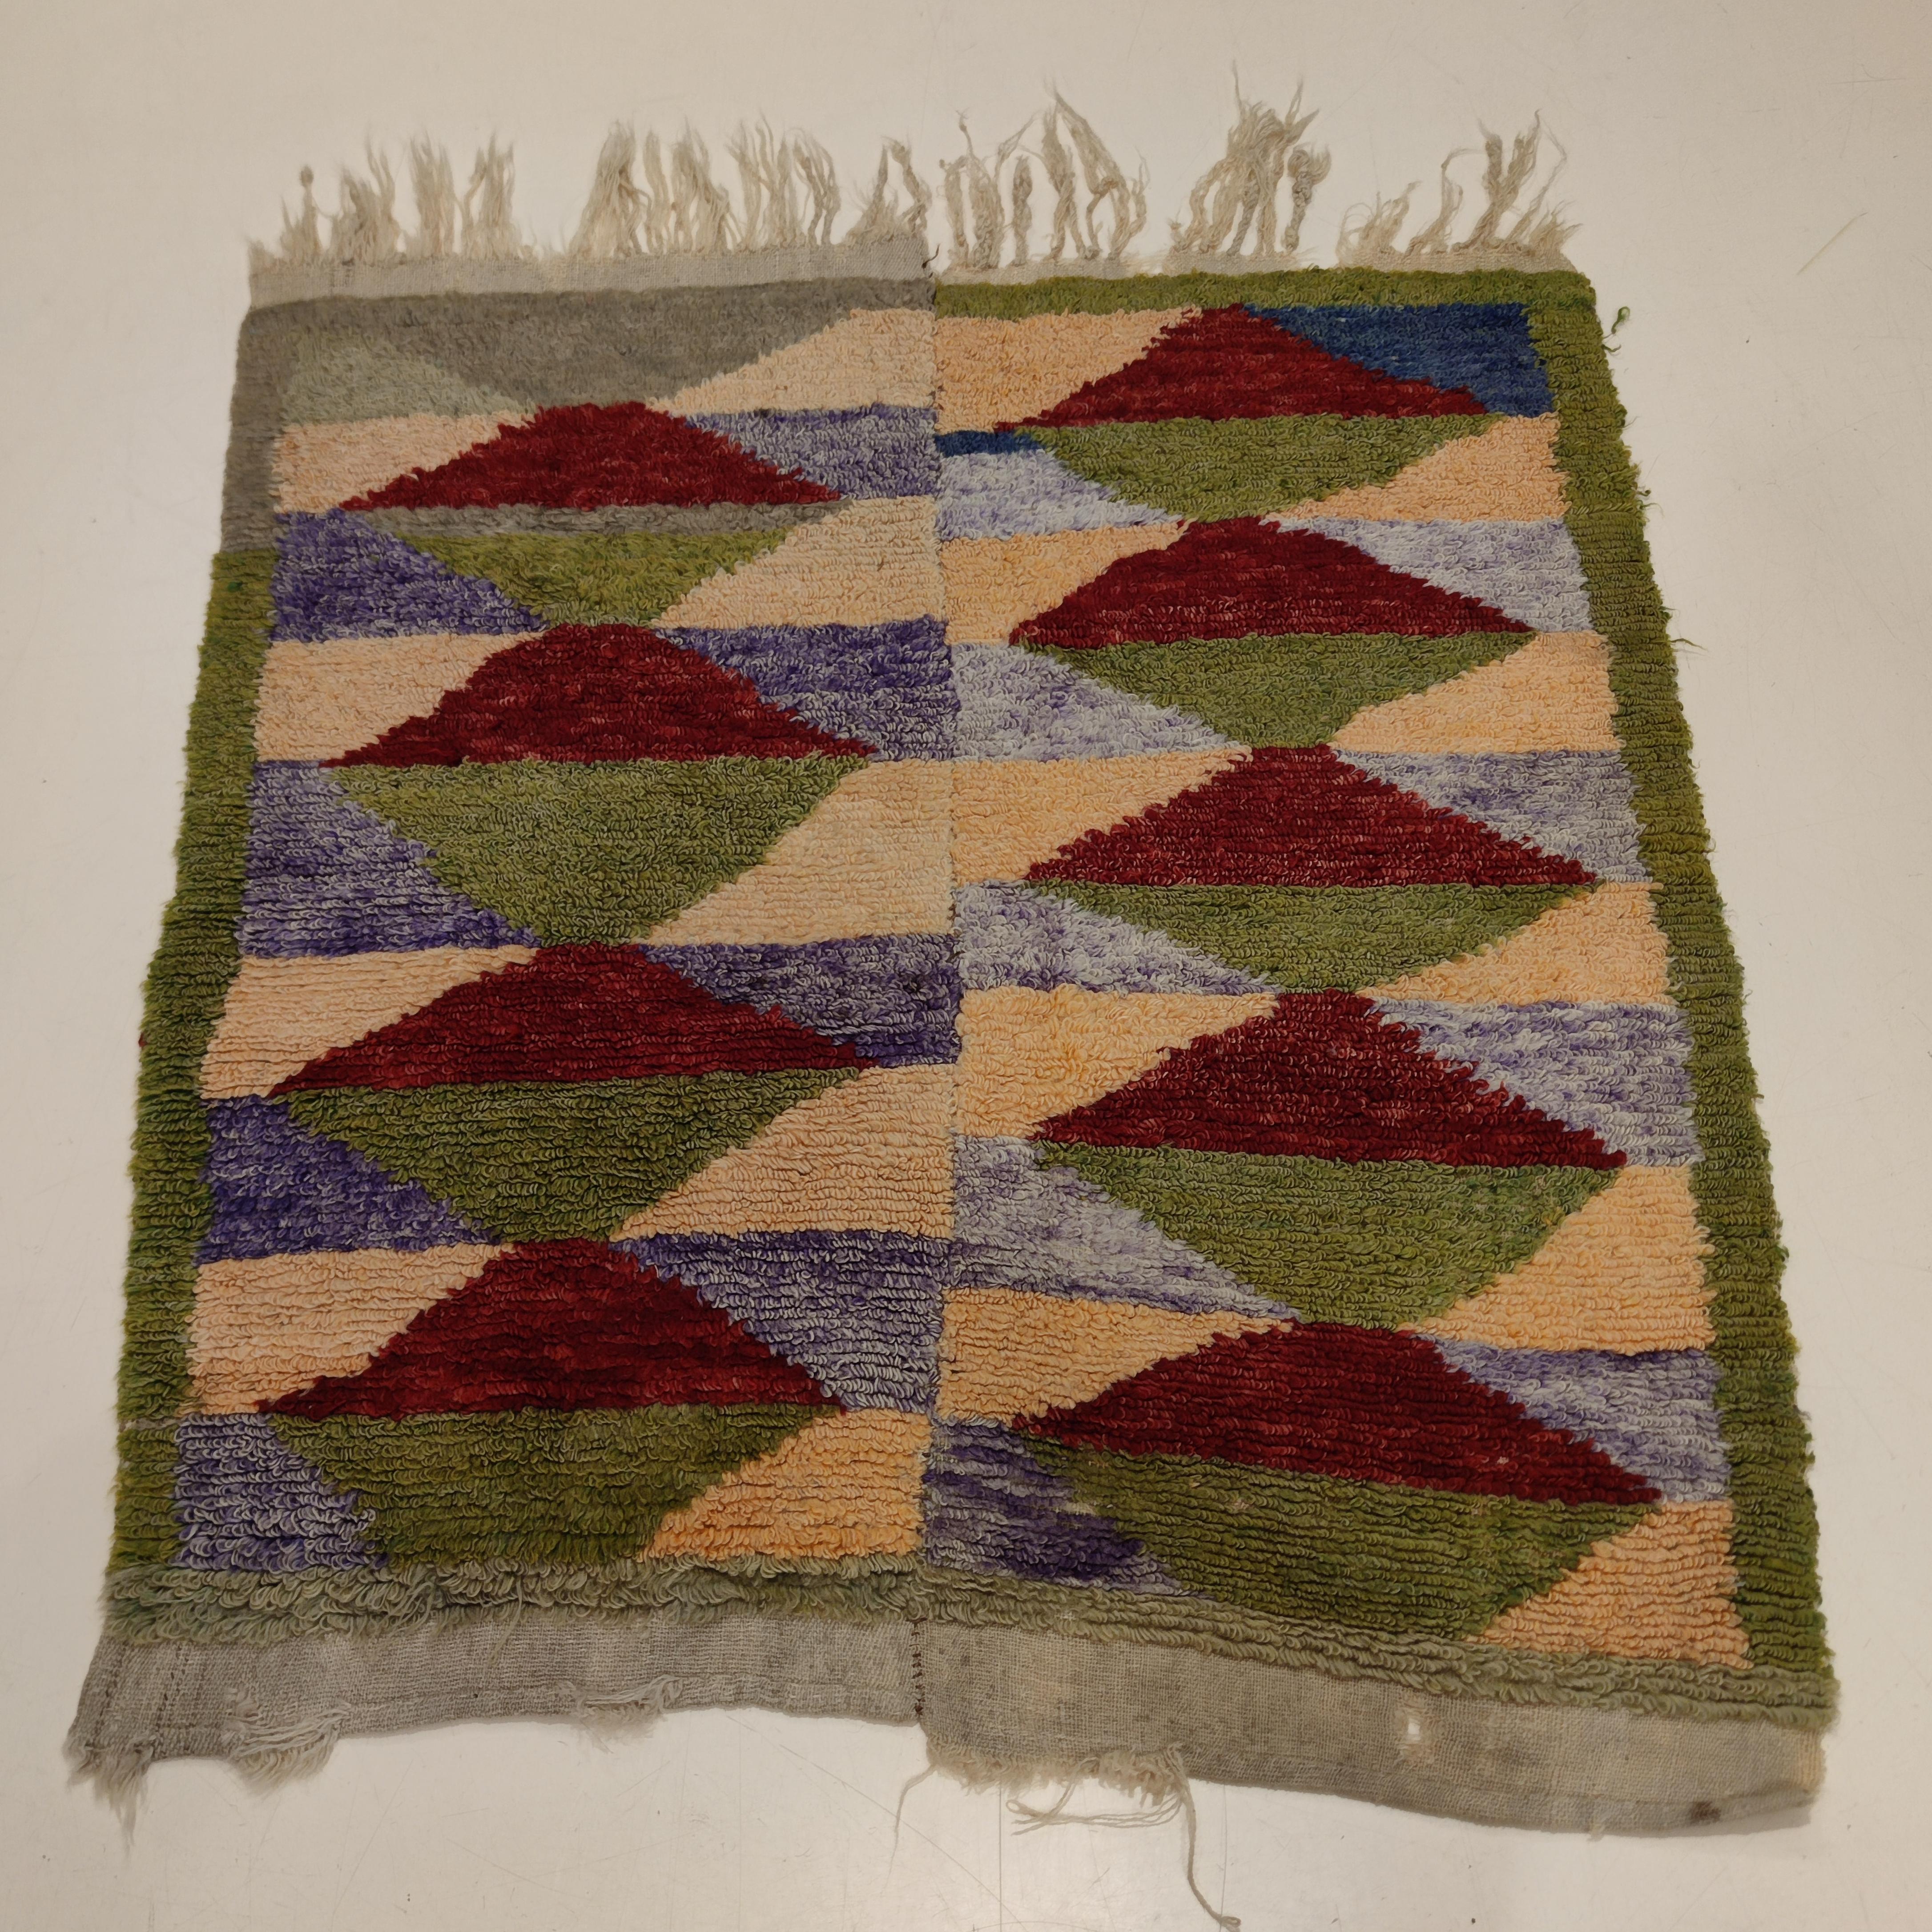 Tulu rugs represent one of the earliest forms of nomadic pile weaving, typically knotted with a medium-high pile as they were meant as bedding rugs for the tent. Woven in the Karapinar area in central Anatolia, these are distinguished by the use of